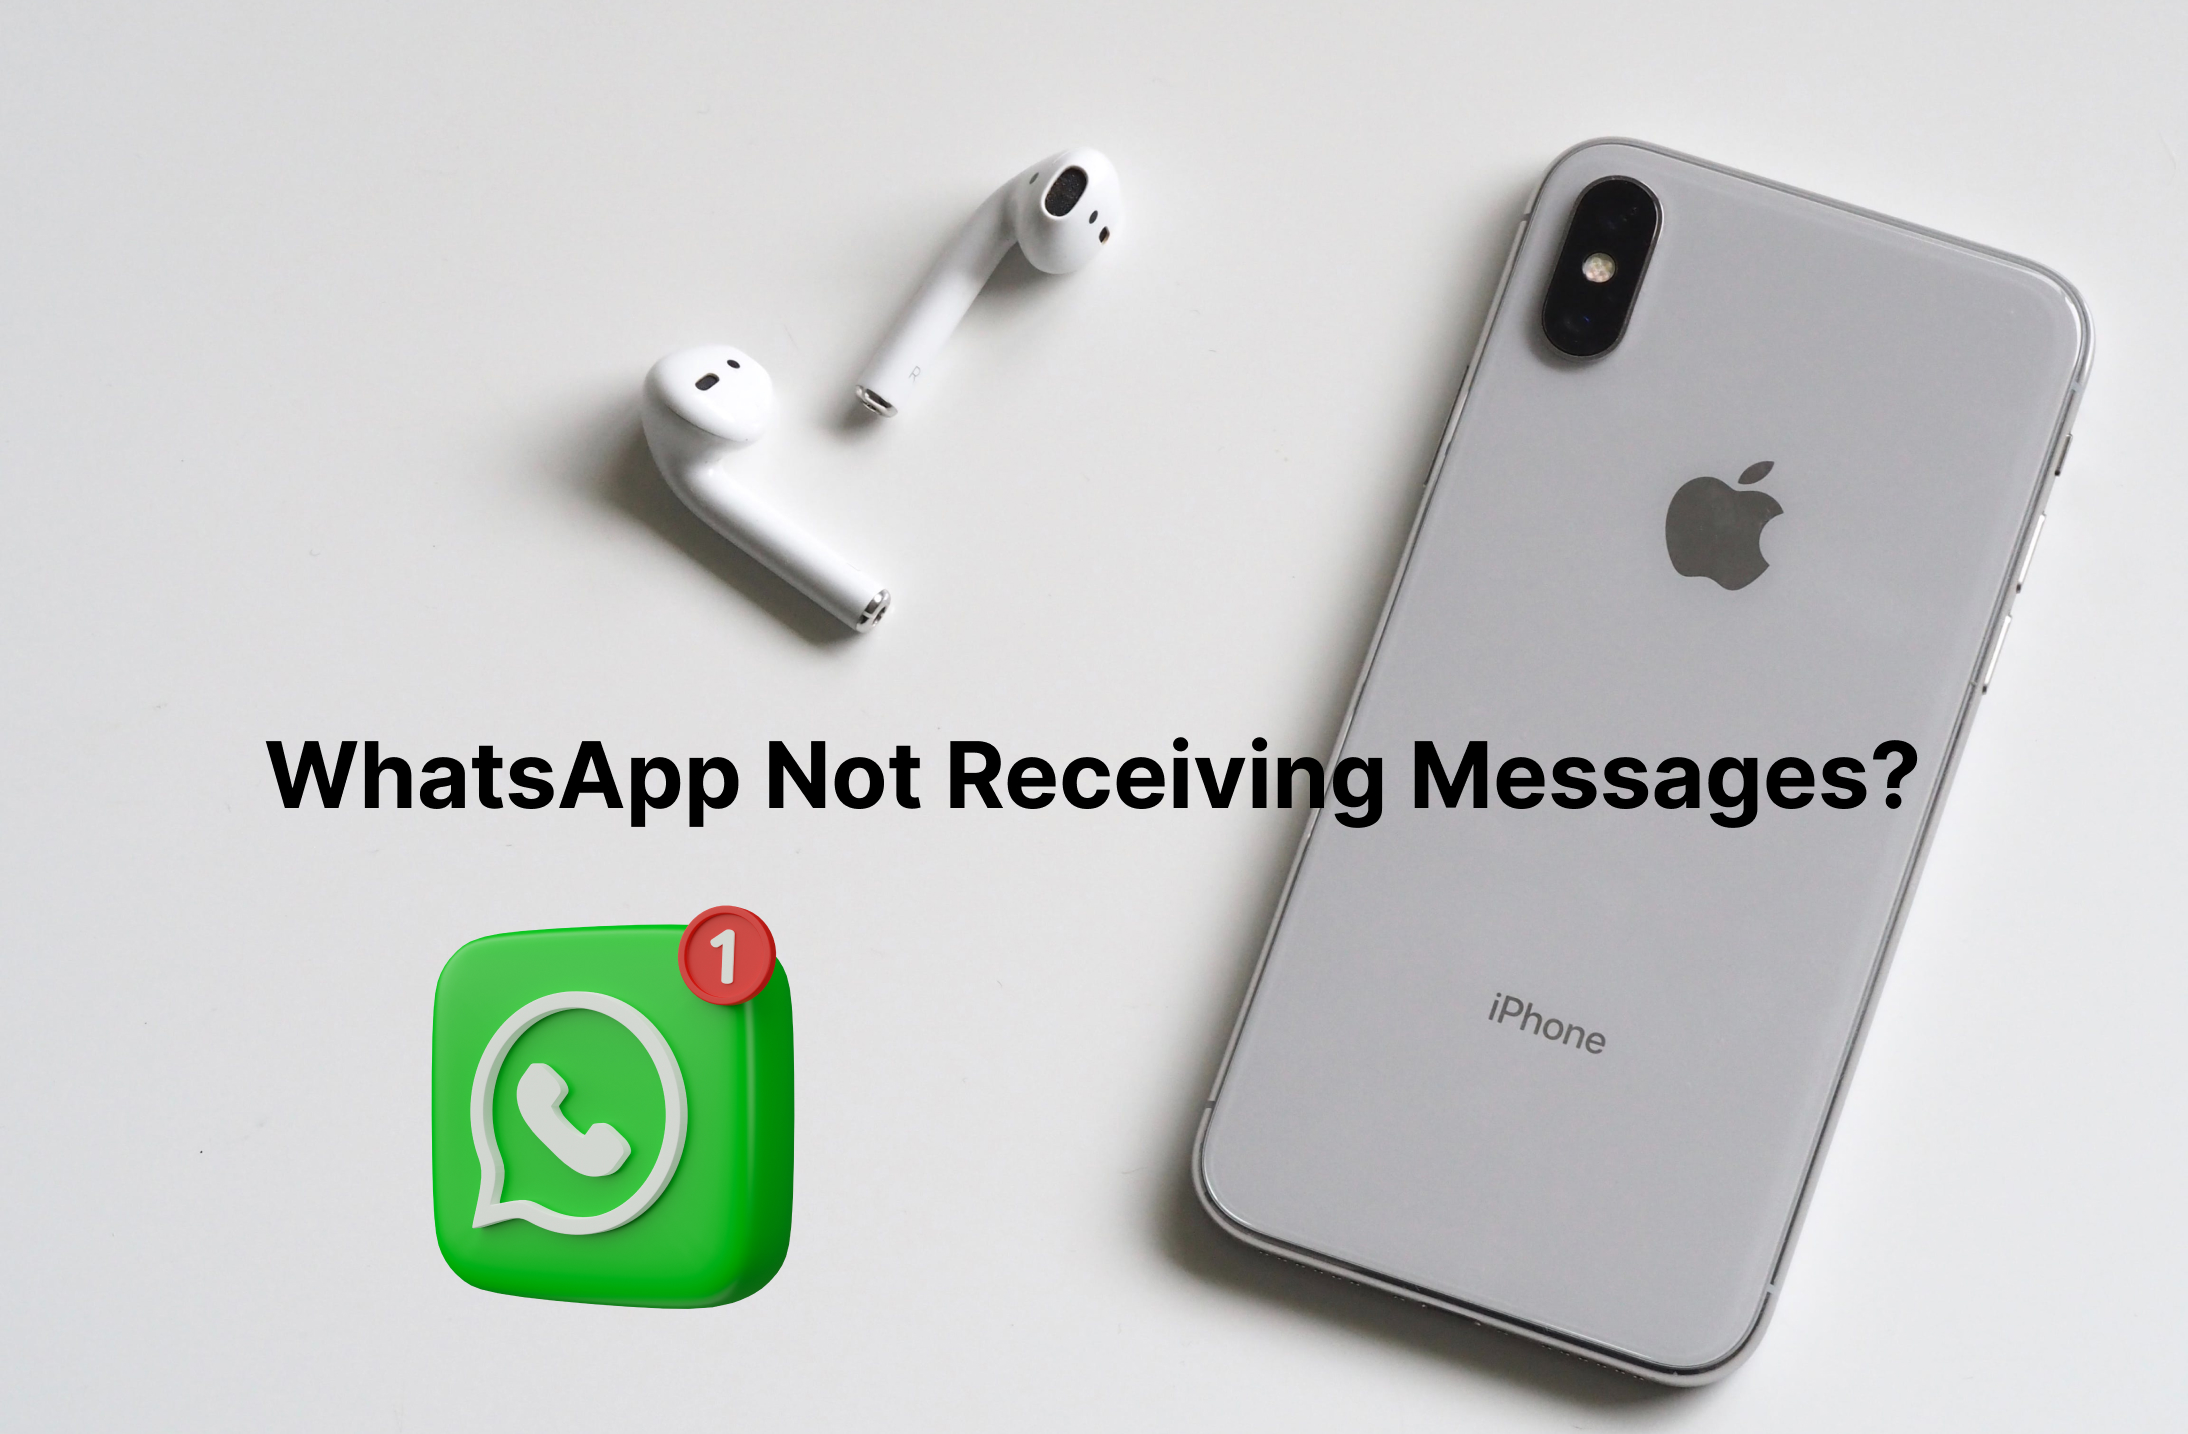 WhatsApp Not Receiving Messages? Try These Fixes